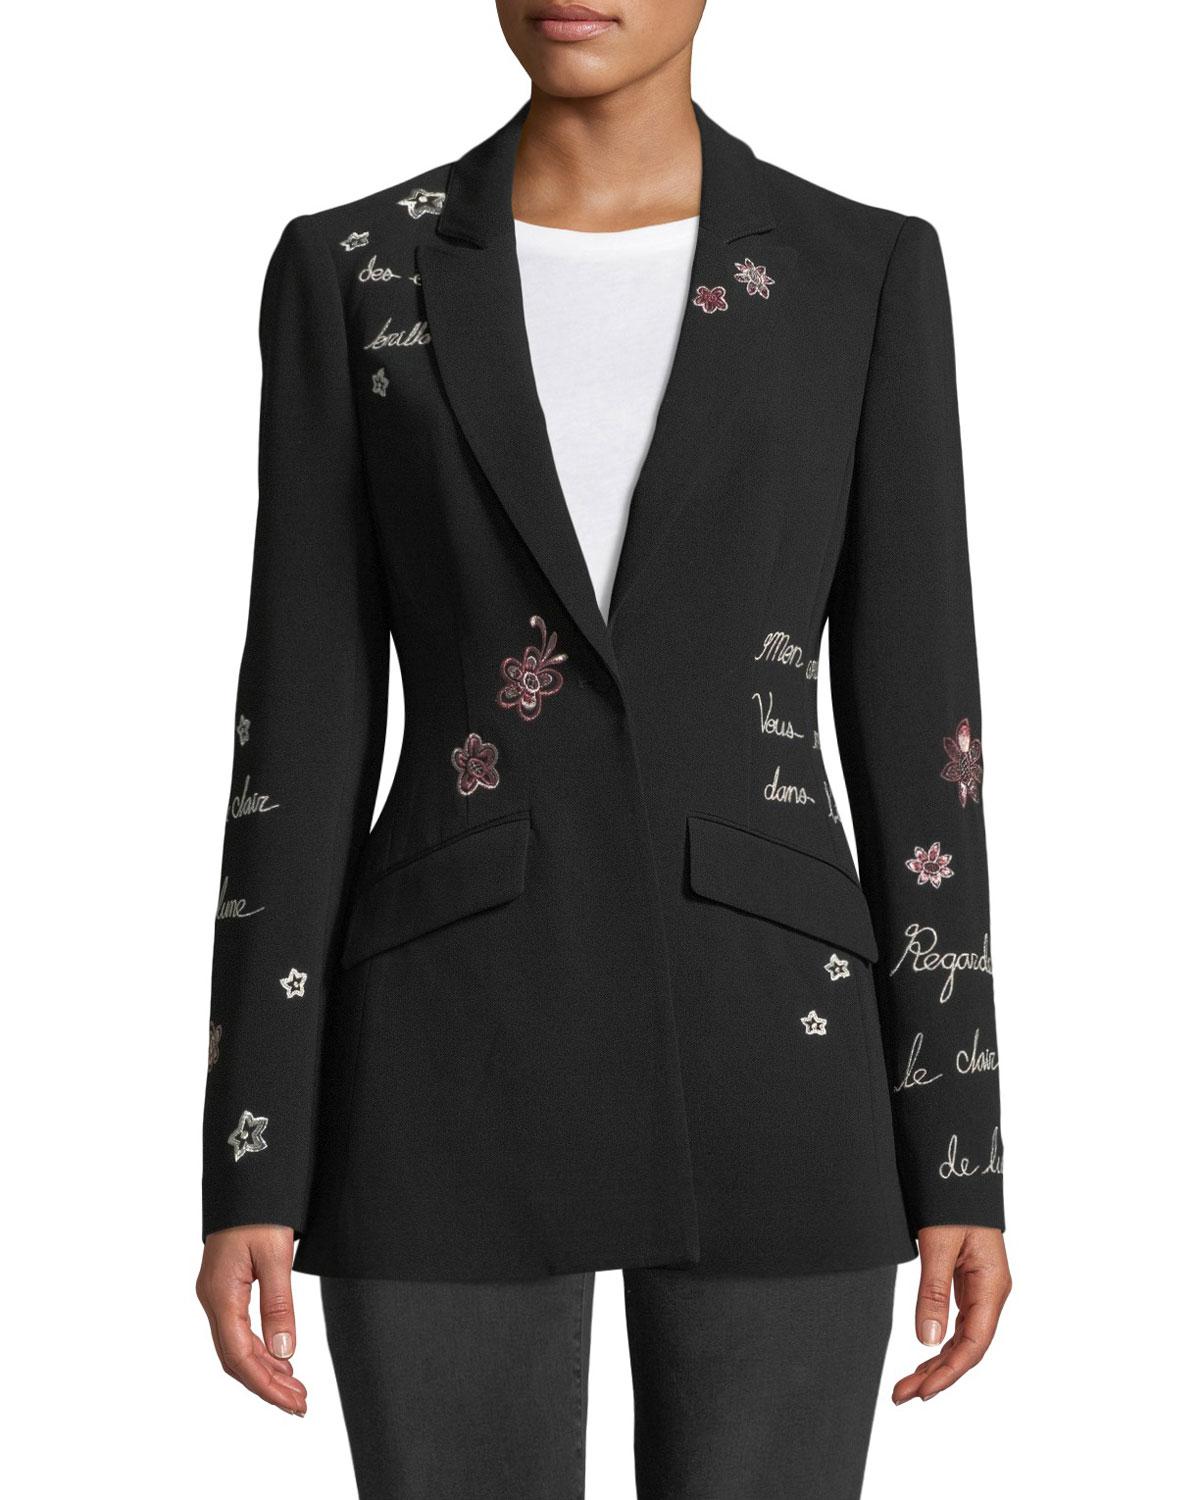 Black Sport Jacket With Floral Pattern - Black Lavender and Gold Tuxedo ...